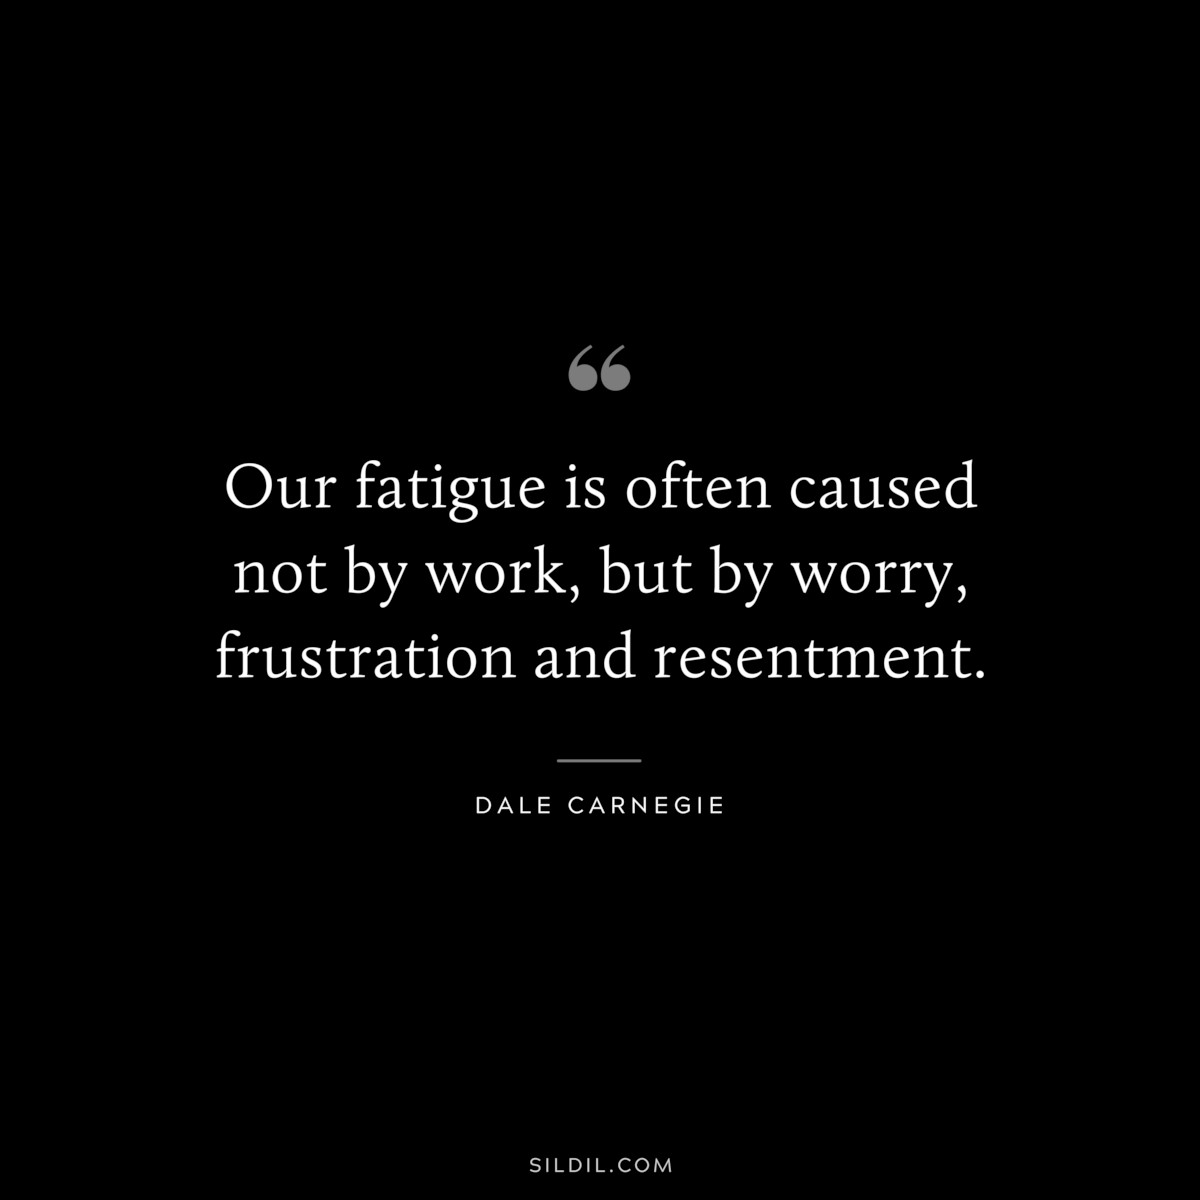 Our fatigue is often caused not by work, but by worry, frustration and resentment.― Dale Carnegie